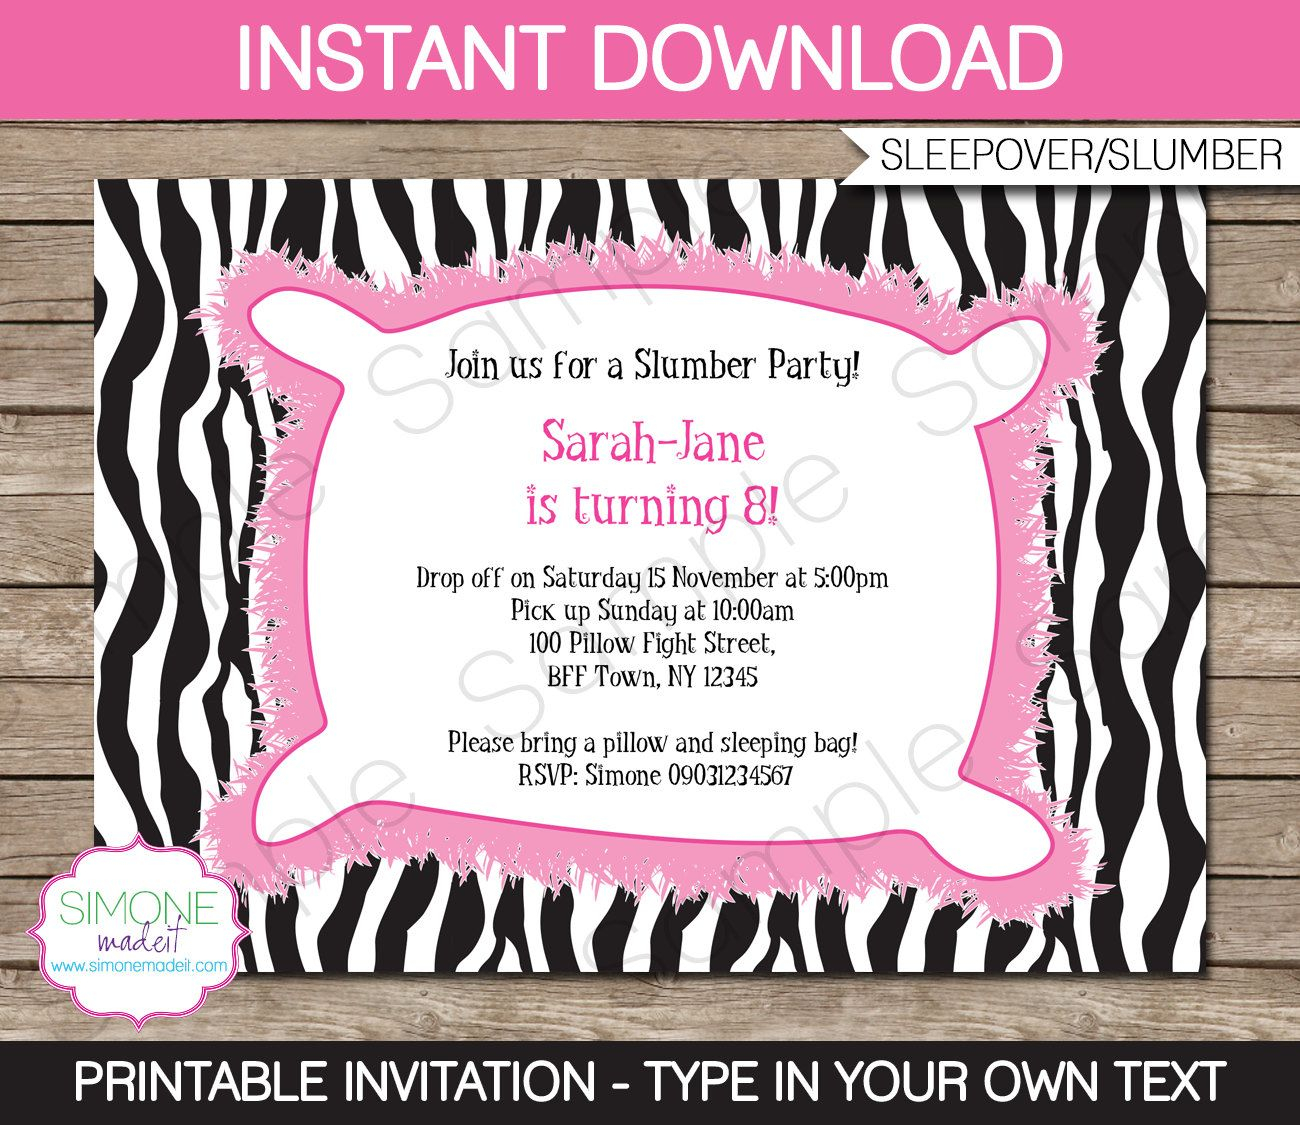 Sleepover Invitation Template Birthday Party Instant Download within dimensions 1300 X 1125